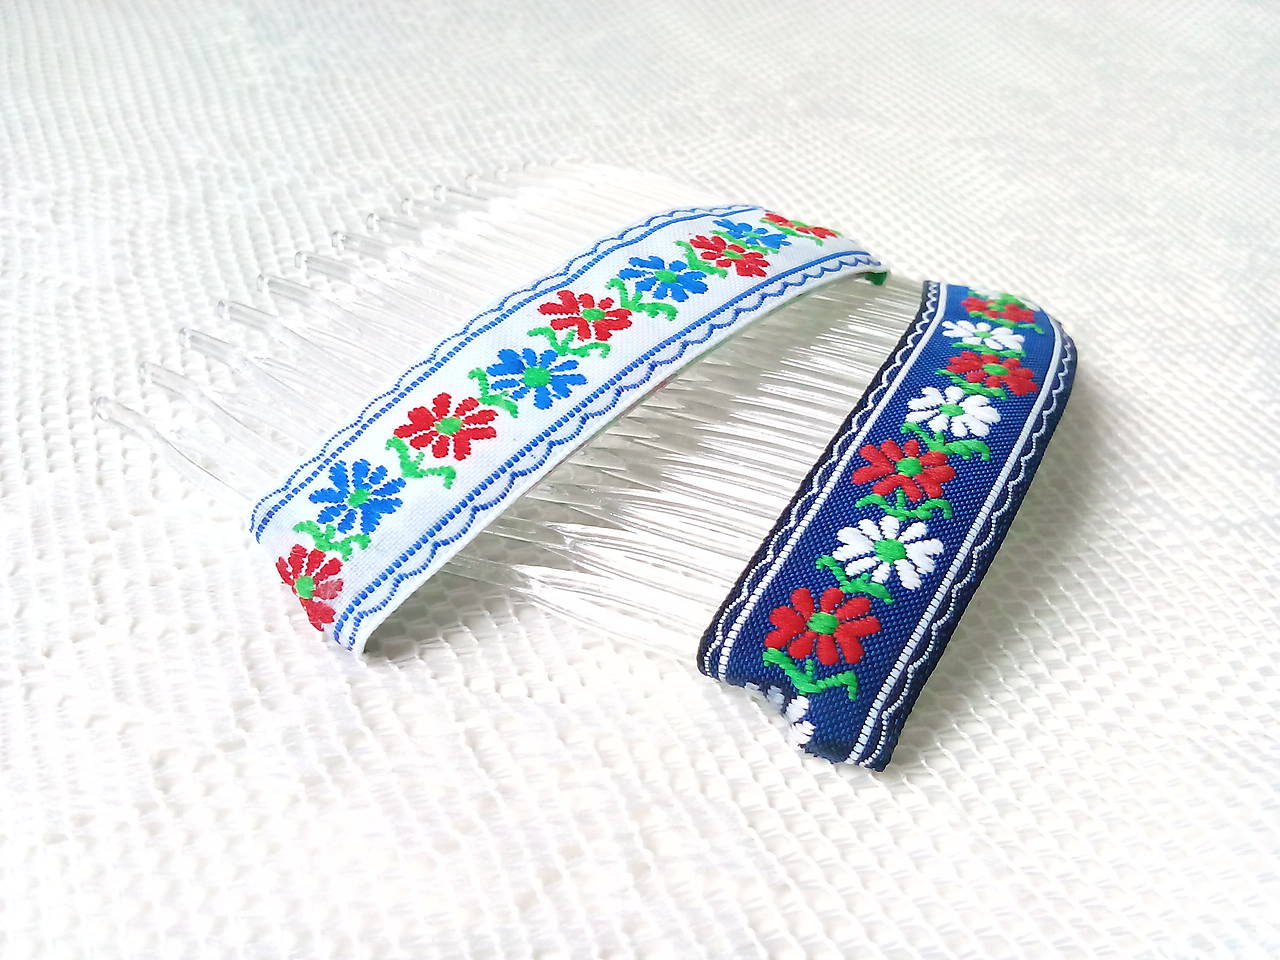 Folklore hair combs